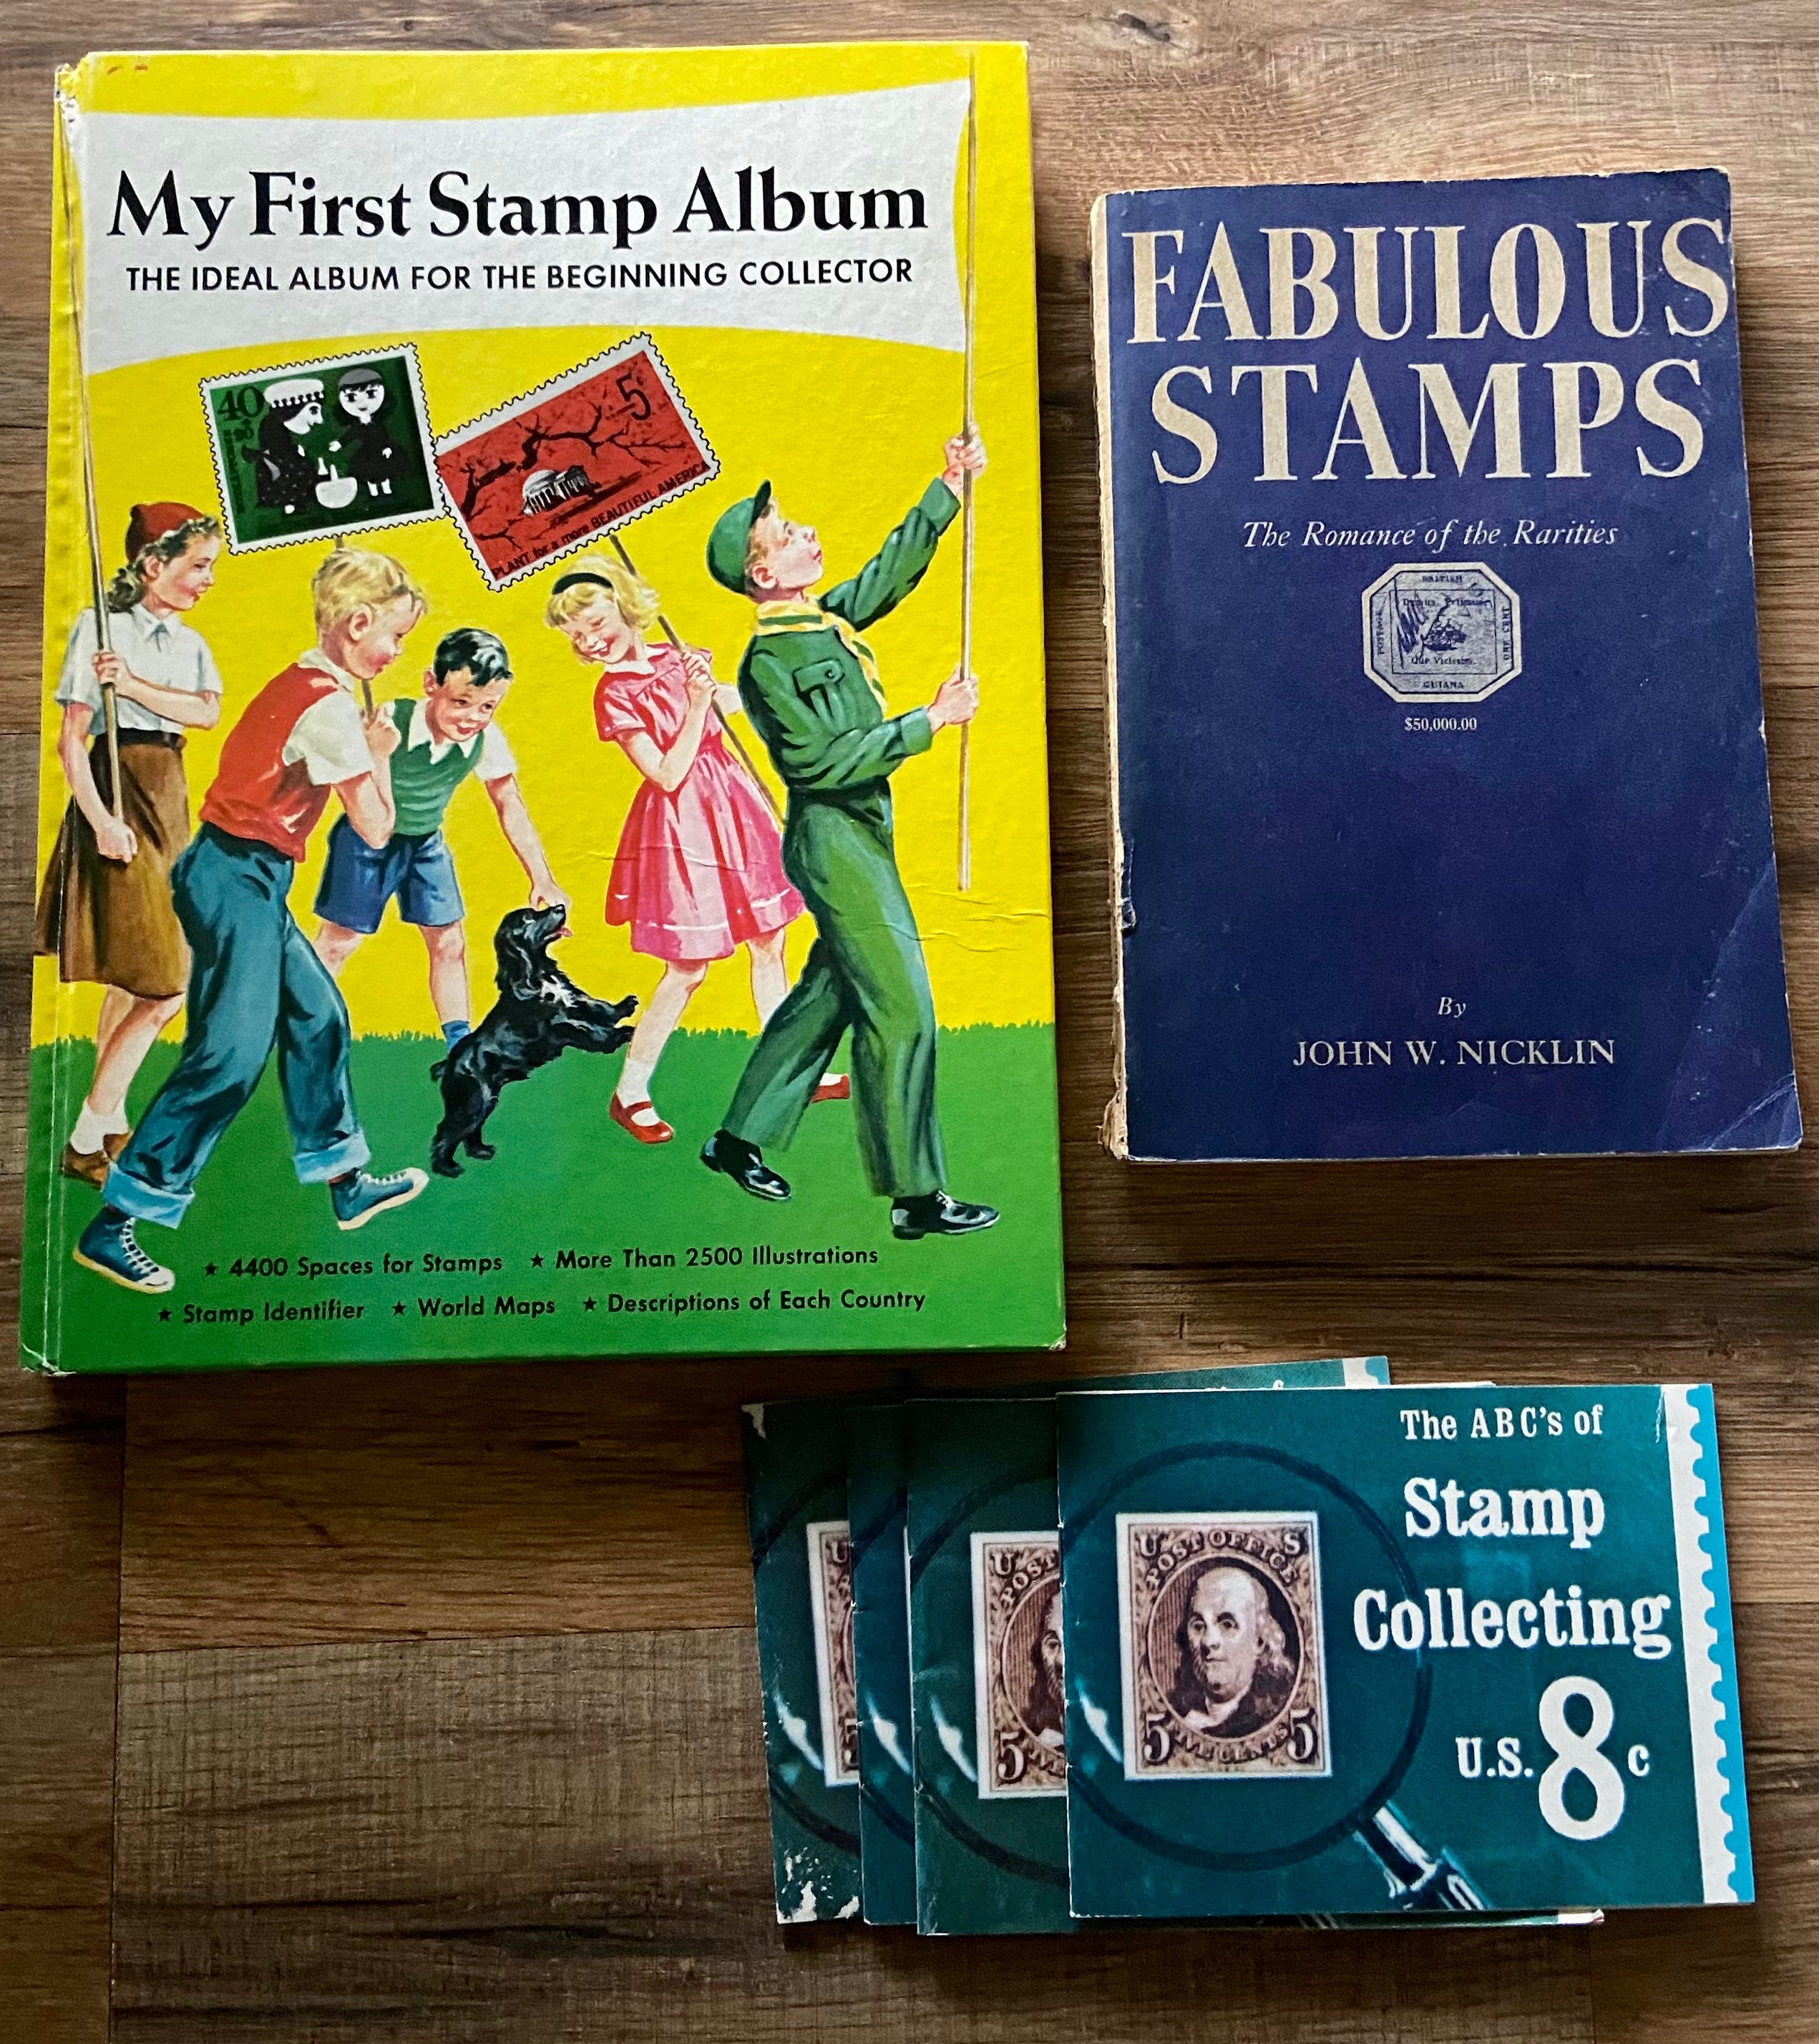 My first stamp collecting book: Stamp collecting album for kids